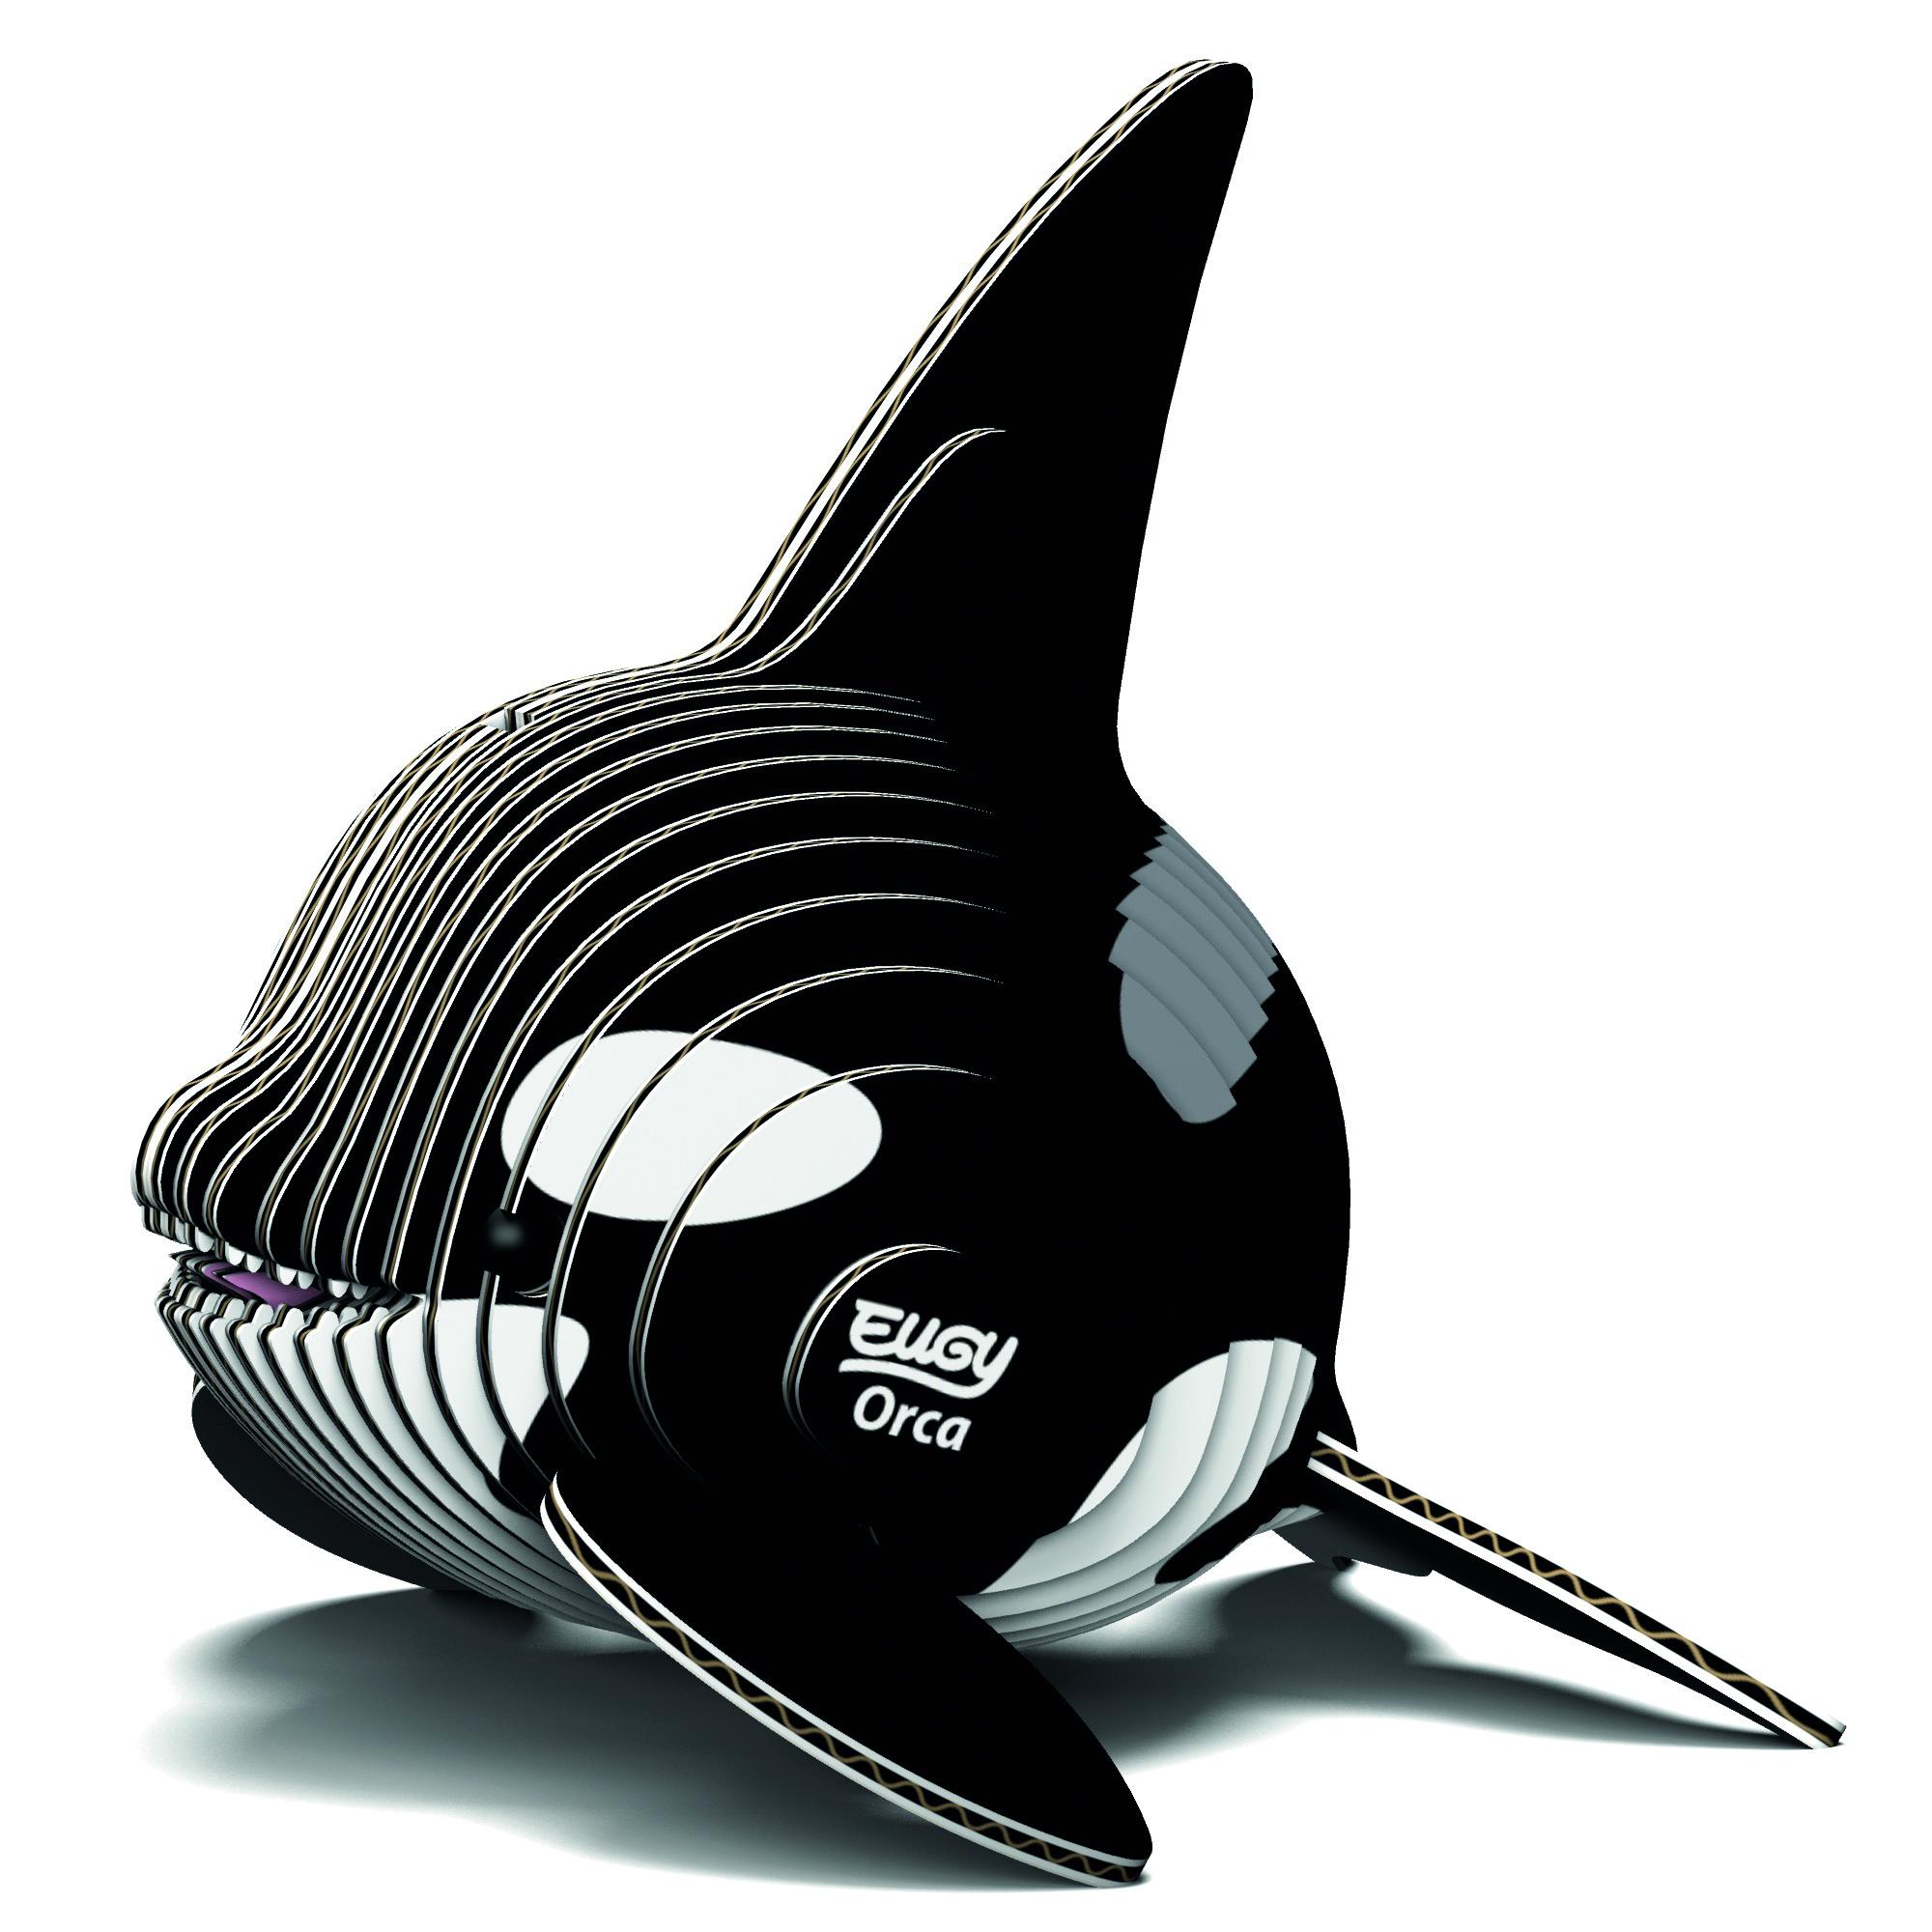 Black and white card orca figure.